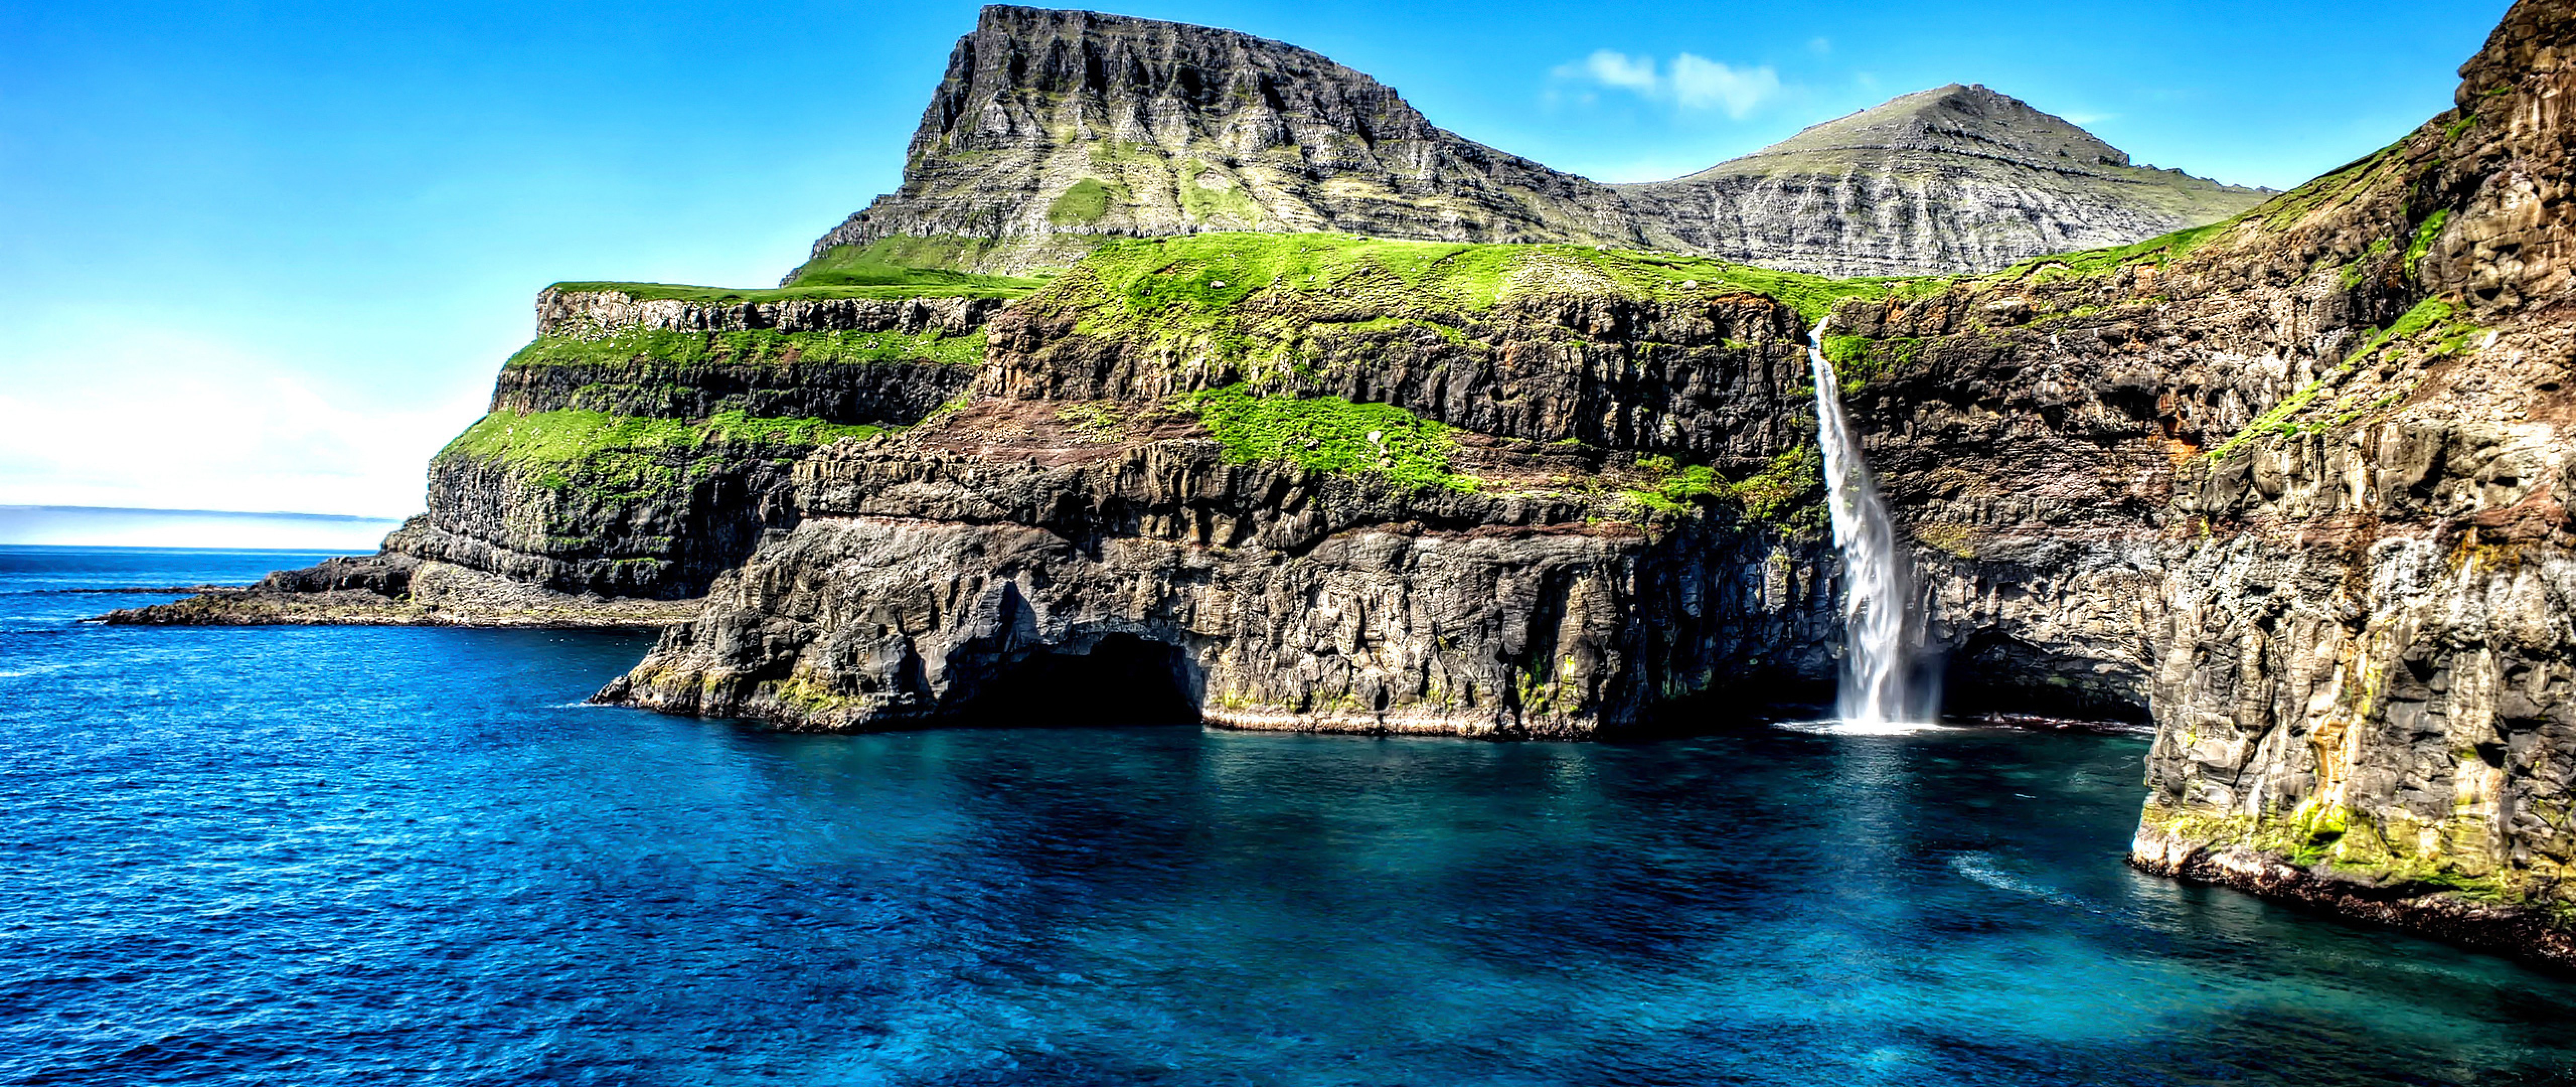 ultra hd wallpapers for mobile,body of water,natural landscape,nature,cliff,coastal and oceanic landforms